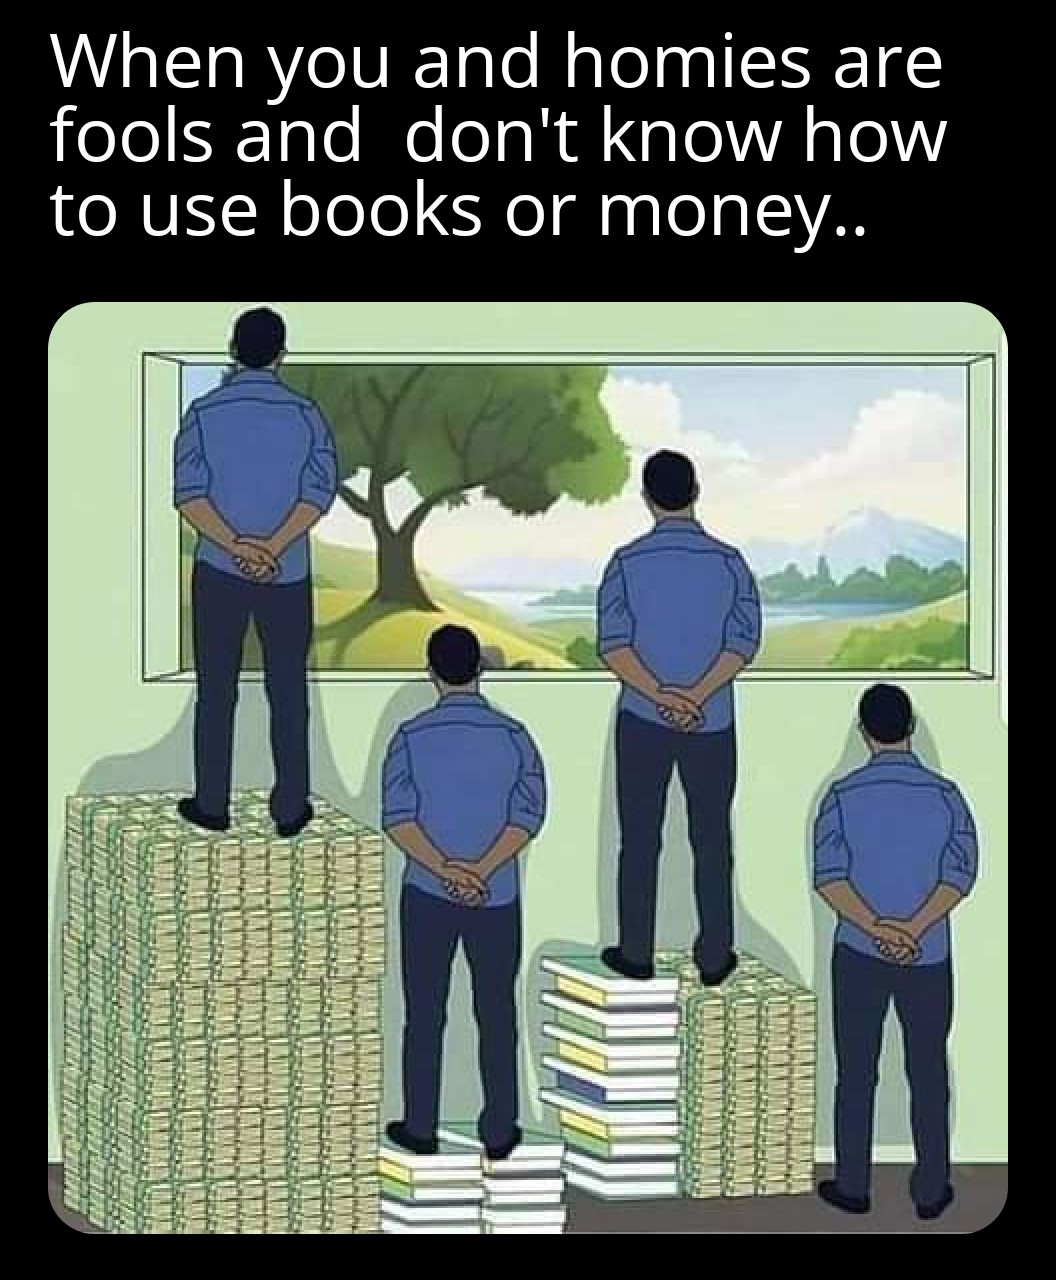 life and knowledge - When you and homies are fools and don't know how to use books or money.. Troxannat